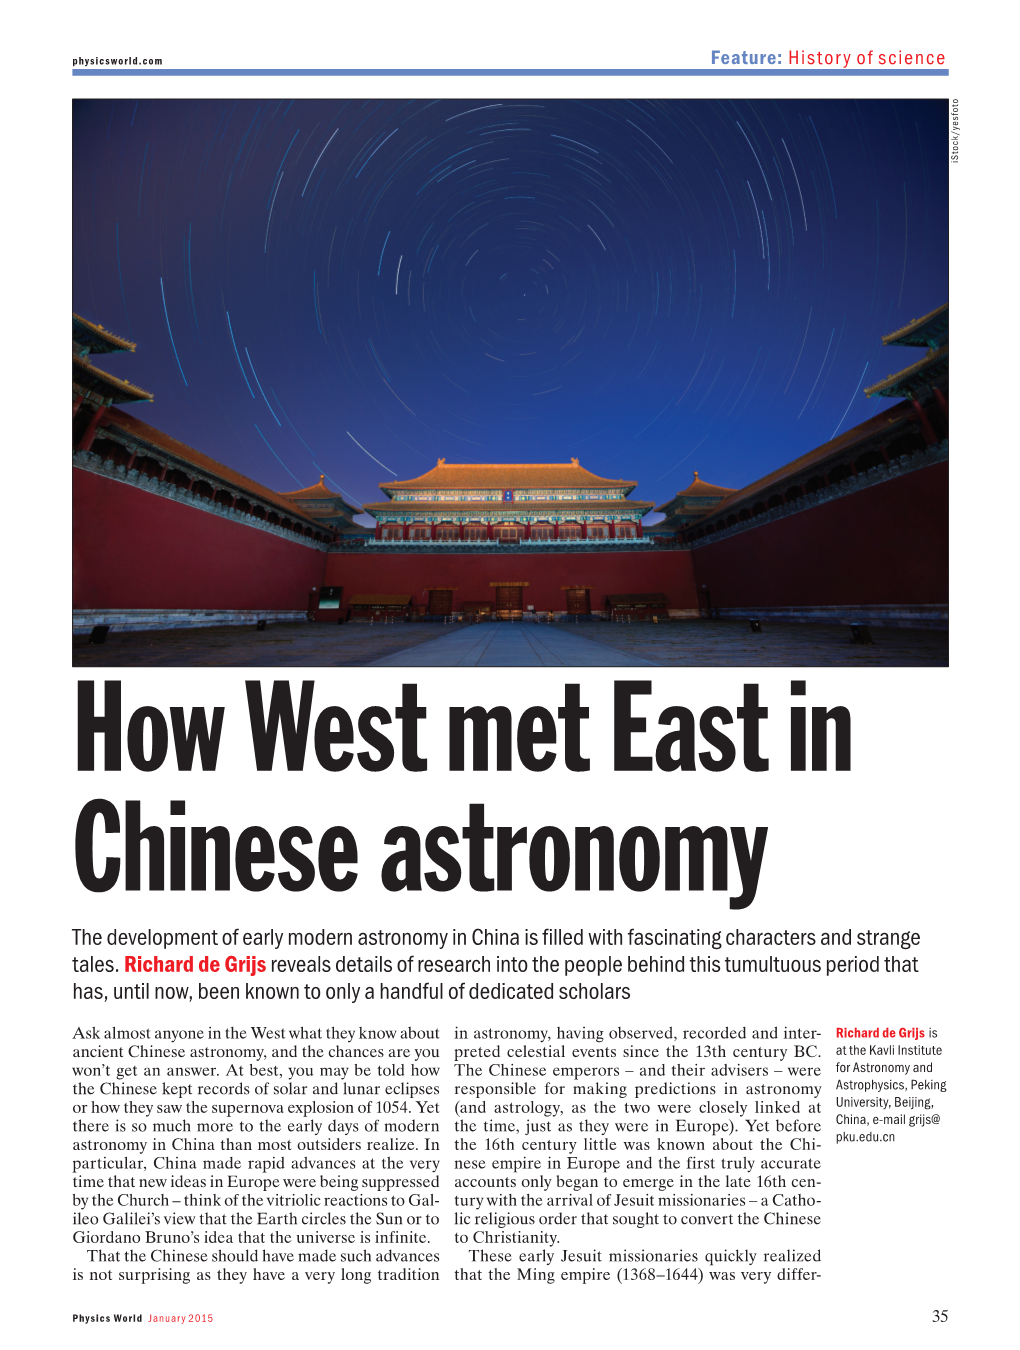 How West Met East in Chinese Astronomy the Development of Early Modern Astronomy in China Is Filled with Fascinating Characters and Strange Tales